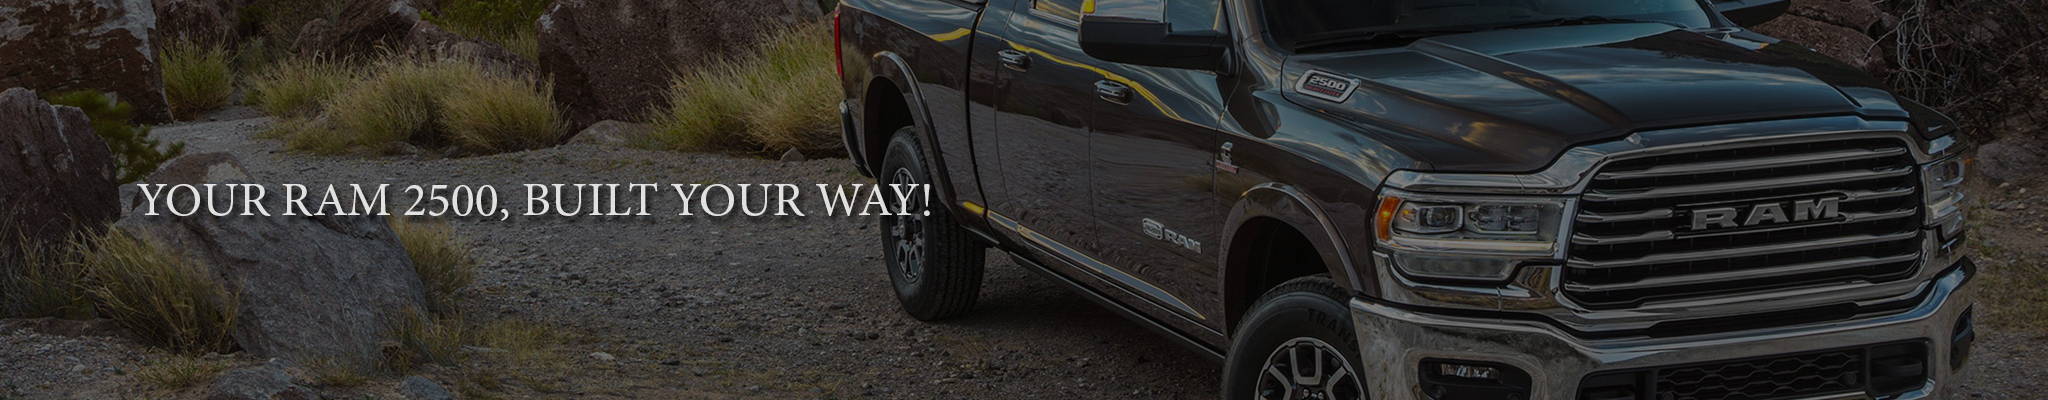 3C Truck Conversions Your Dodge RAM 2500 Truck Built Your Way! Customize your Build Here.